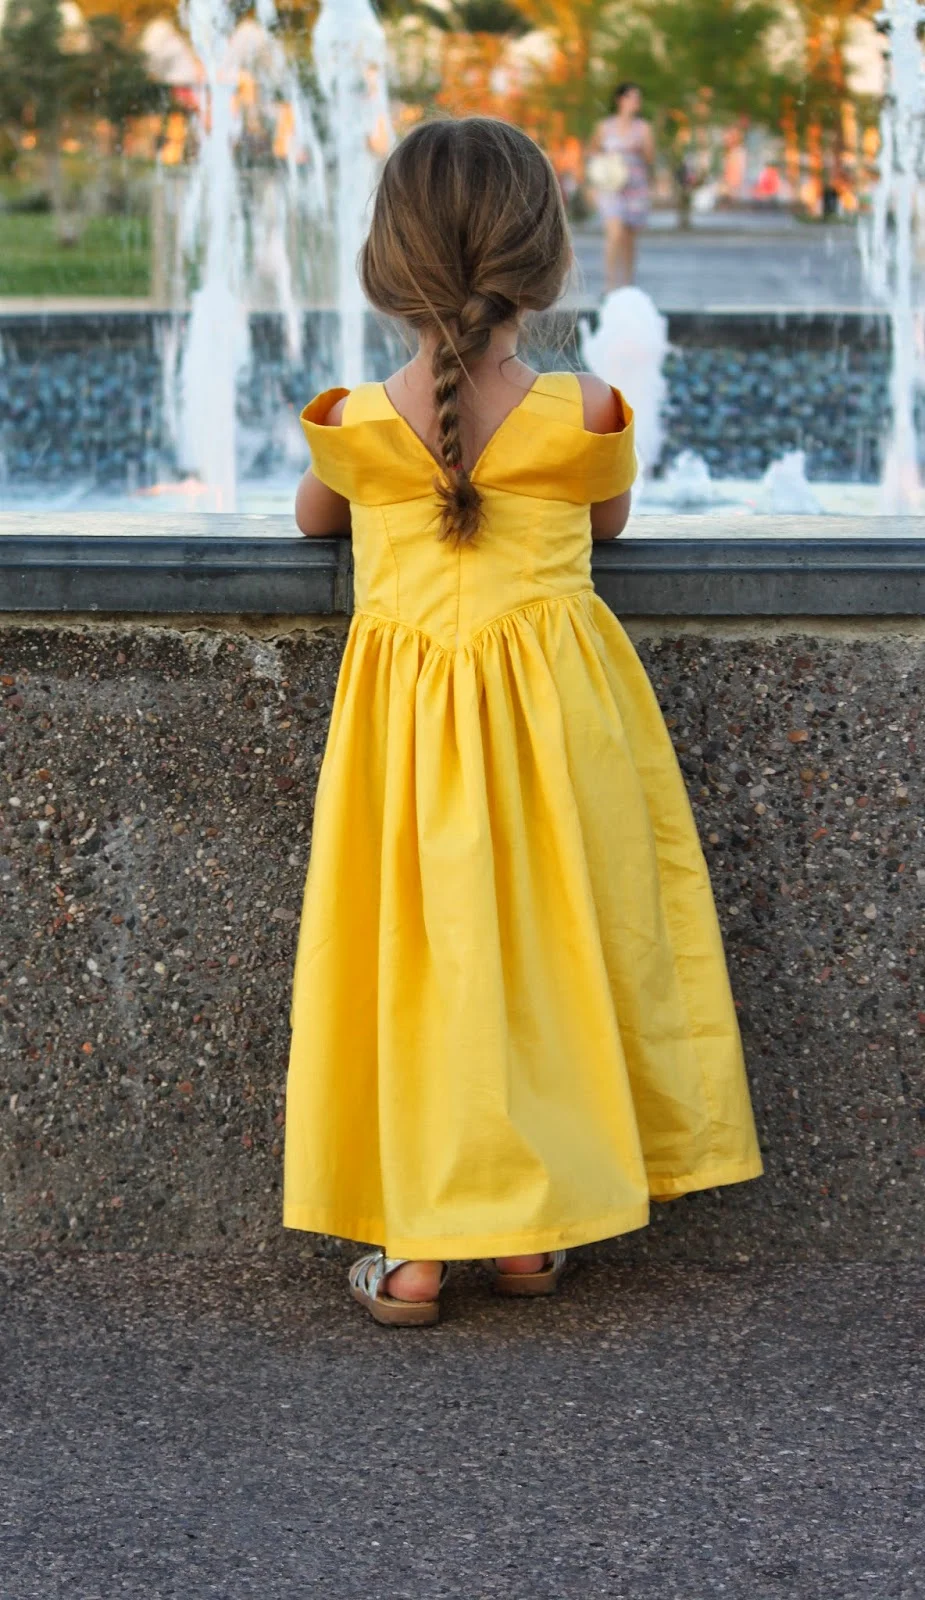 Little girl in yellow princess party dress